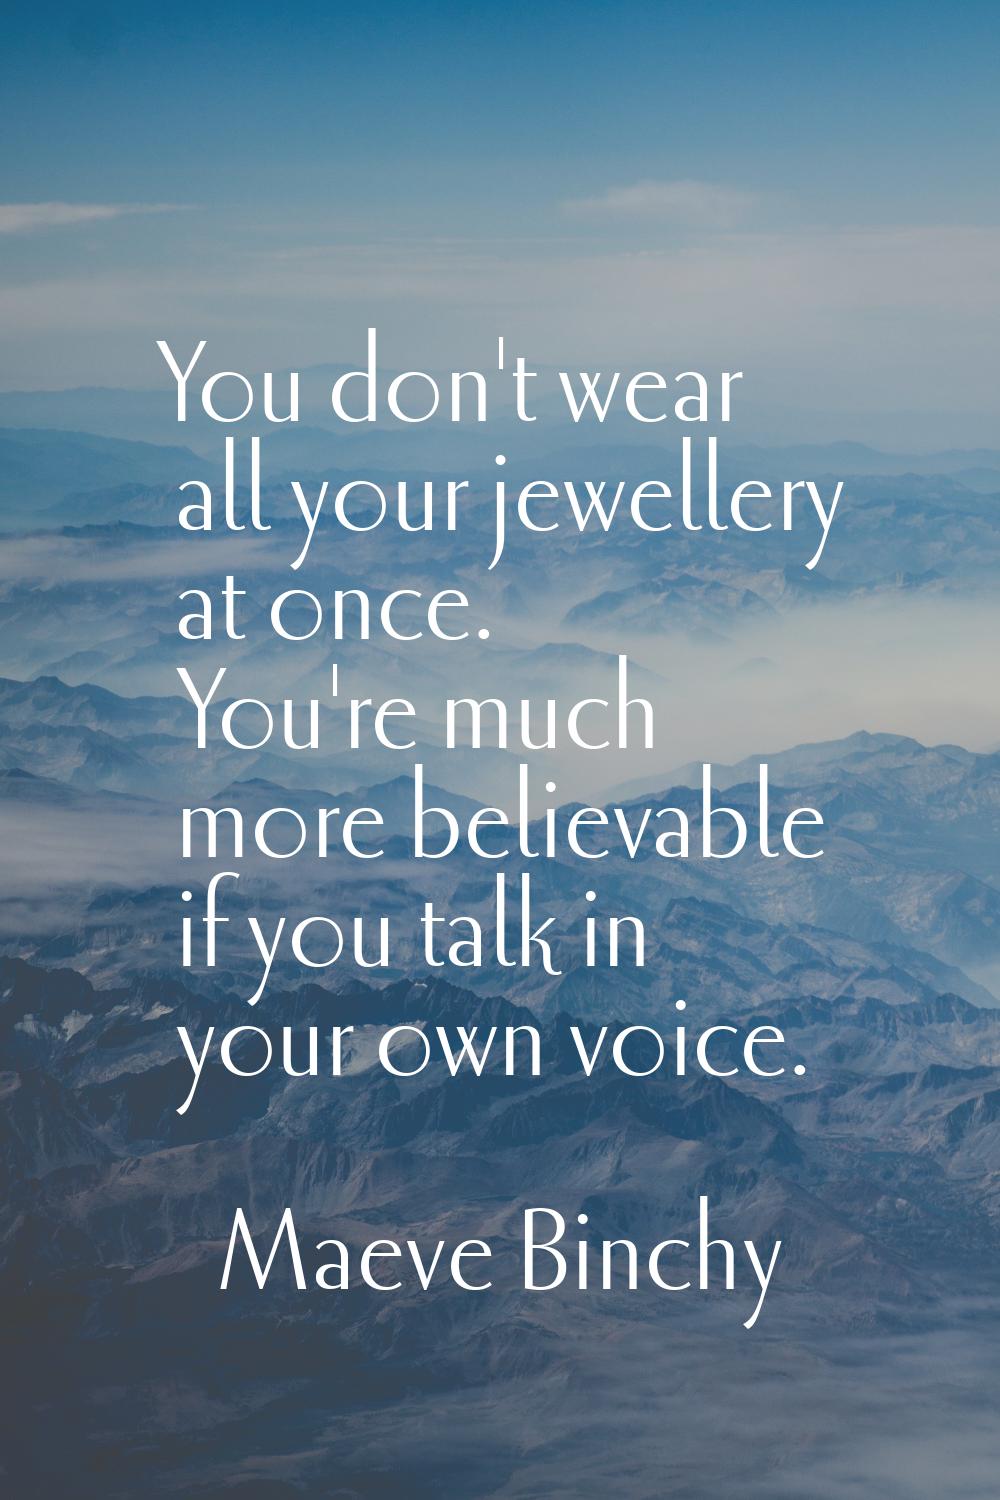 You don't wear all your jewellery at once. You're much more believable if you talk in your own voic